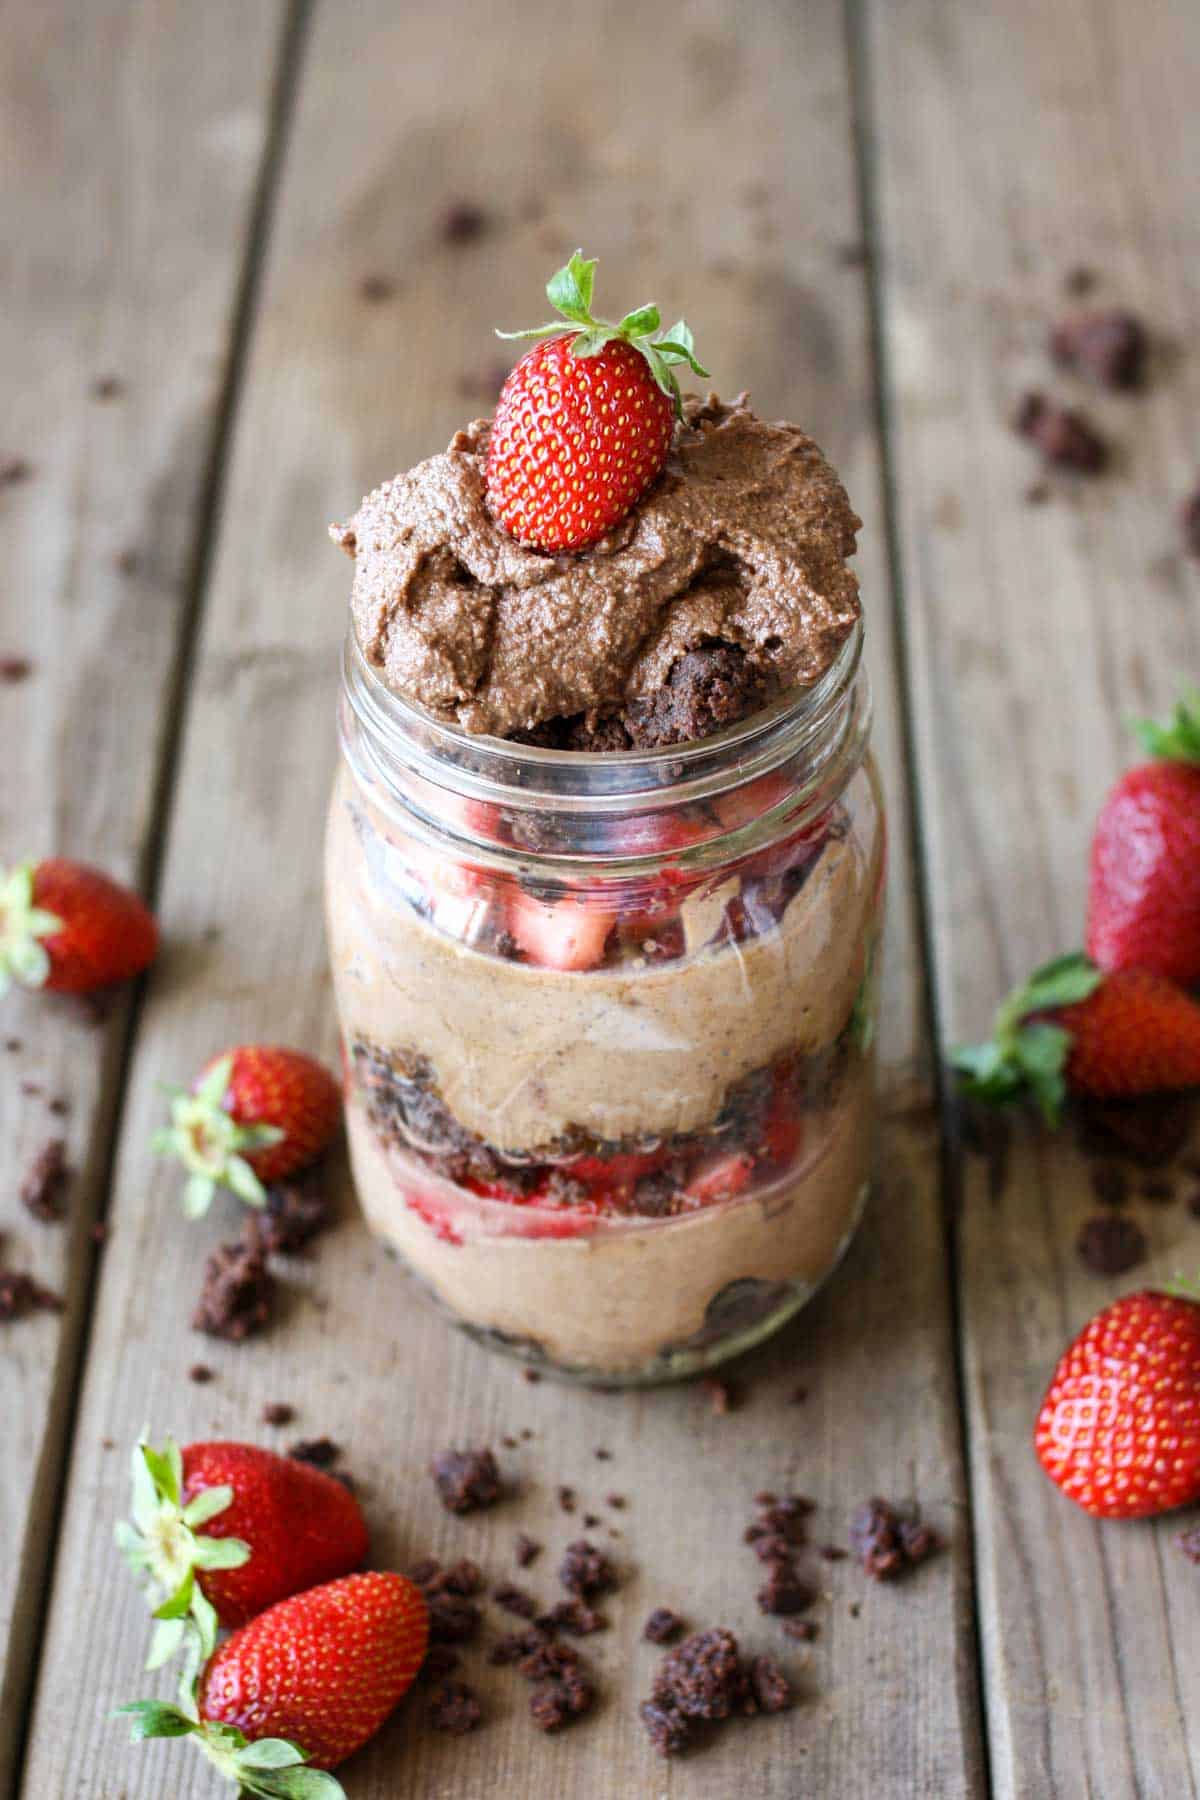 A layered chocolate mousse in a mason jar topped with strawberries on a wooden surface.